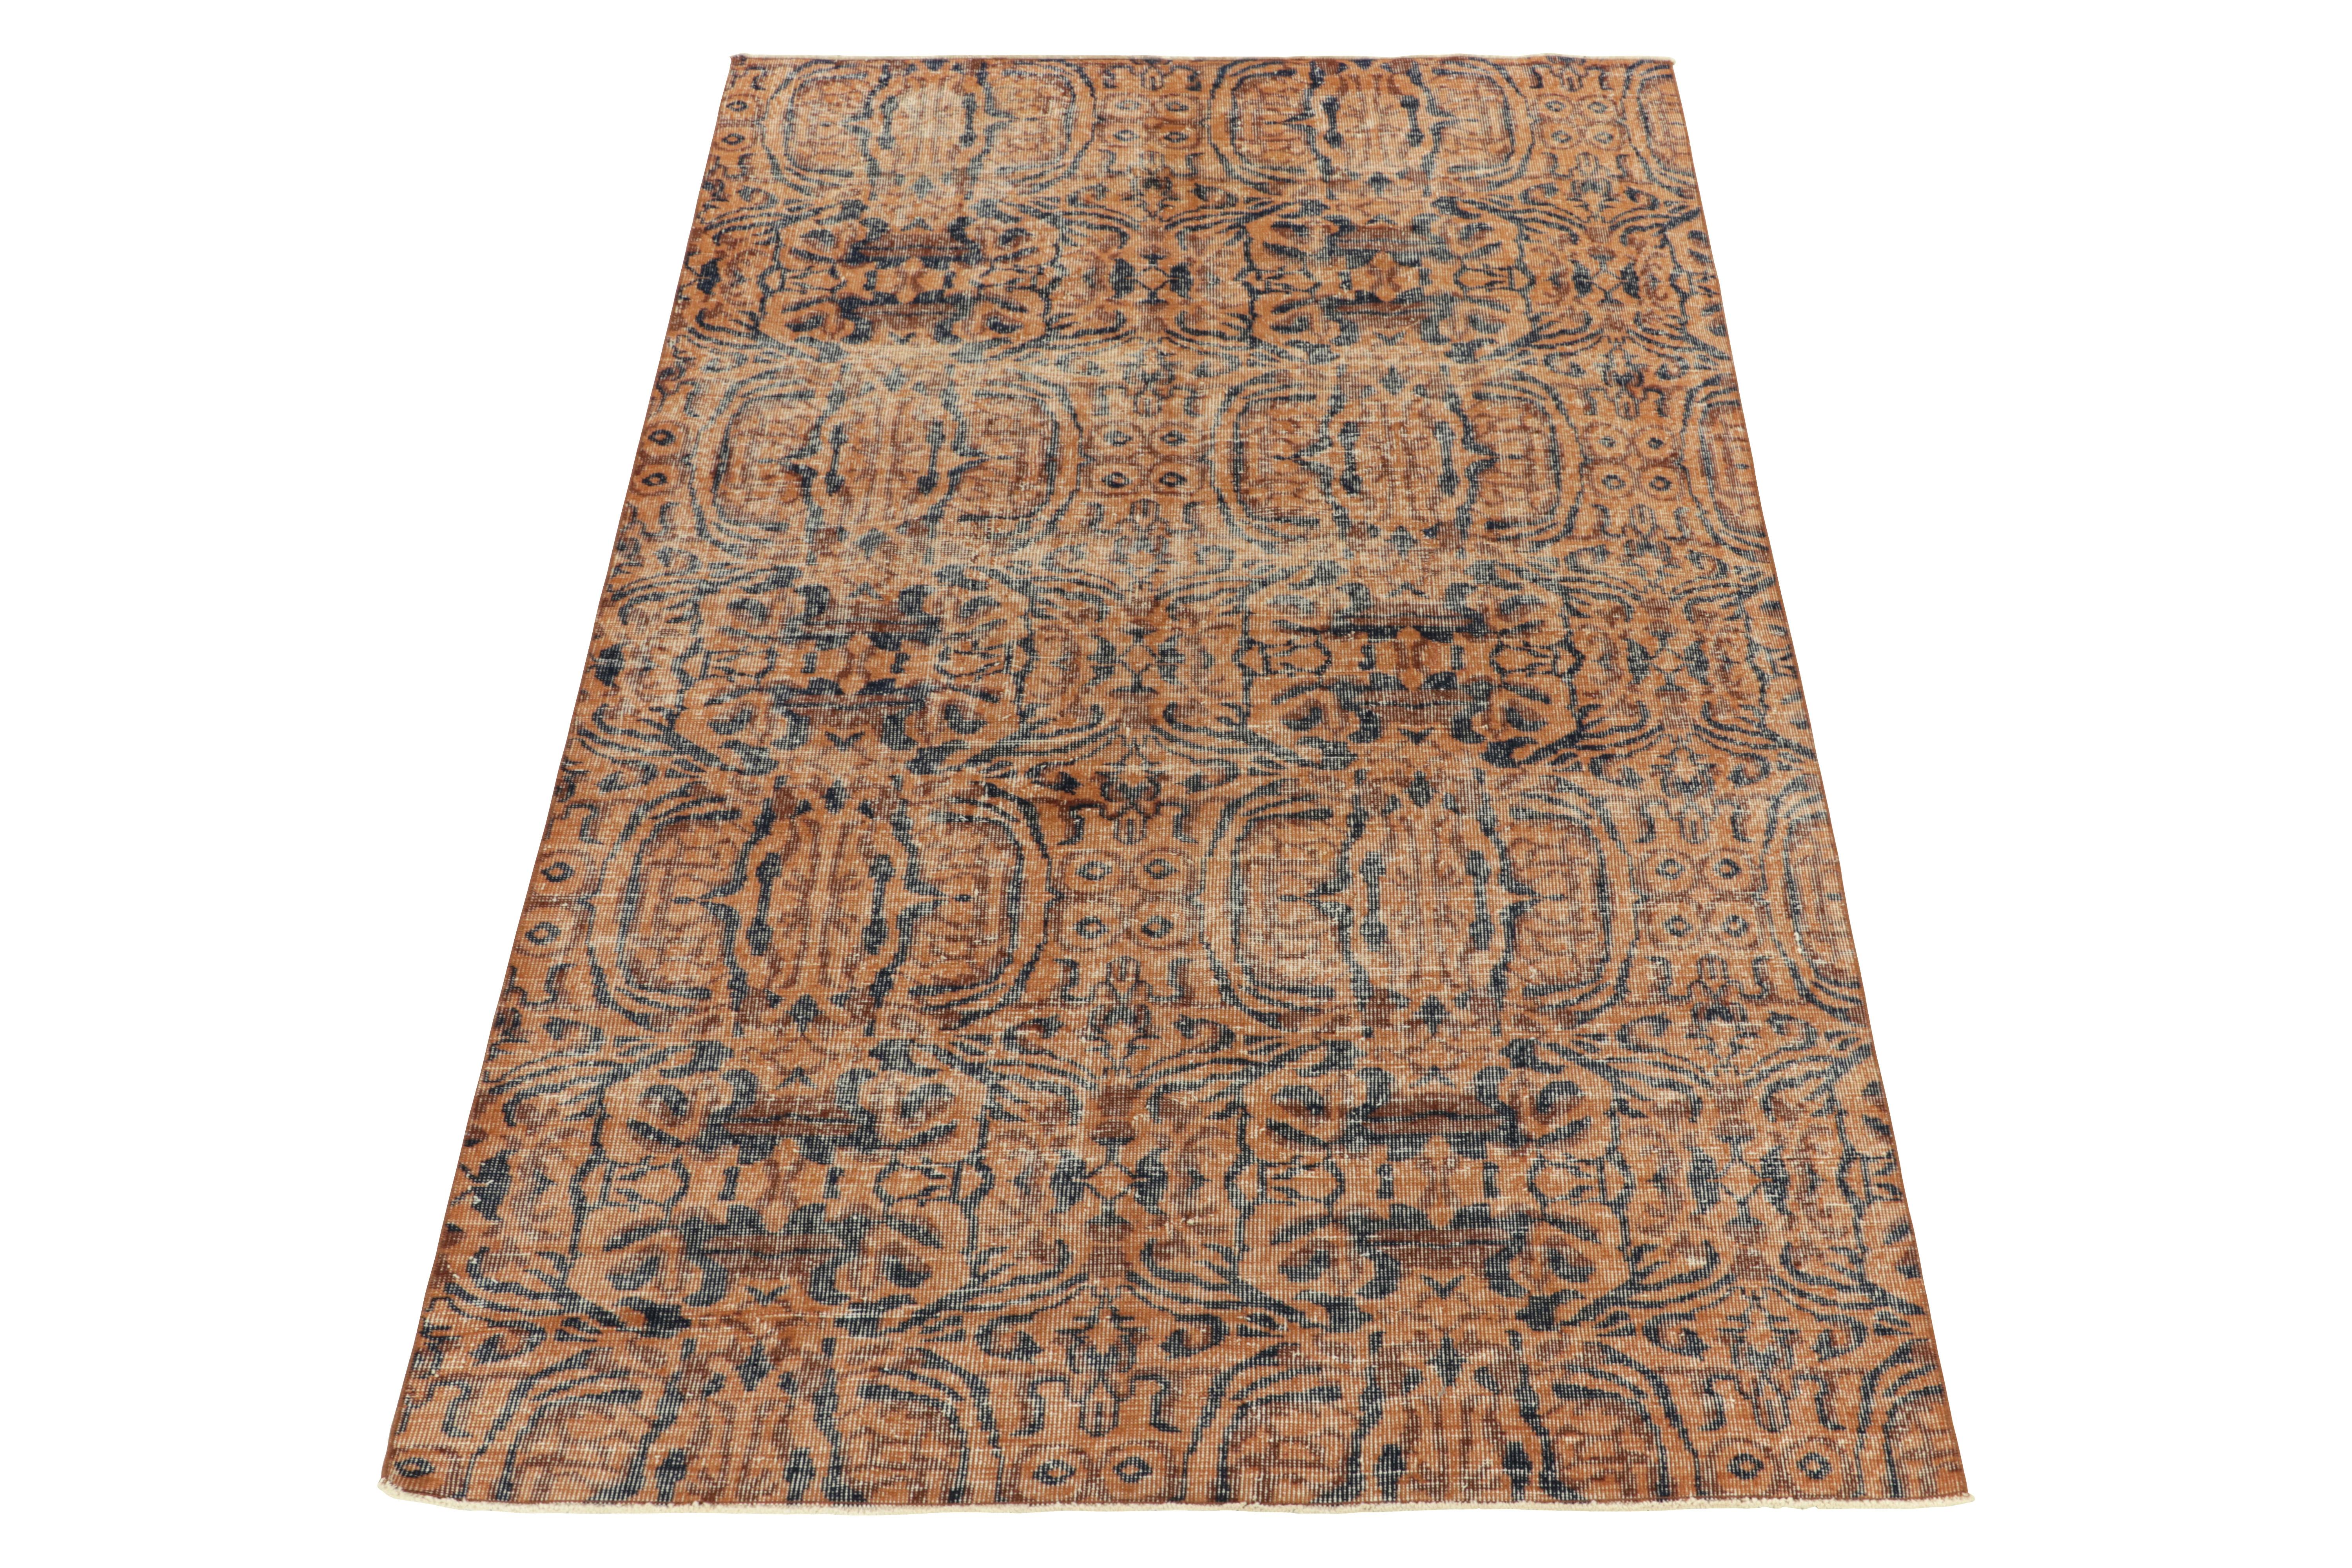 Hand-knotted in wool from Turkey circa 1960-1970, a vintage 5x8 distressed rug from an acclaimed Turkish artist joining Rug & Kilim’s Mid-Century Pasha Collection. Enjoying orange with brown and a deep midnight blue, the rug brings the whole of this